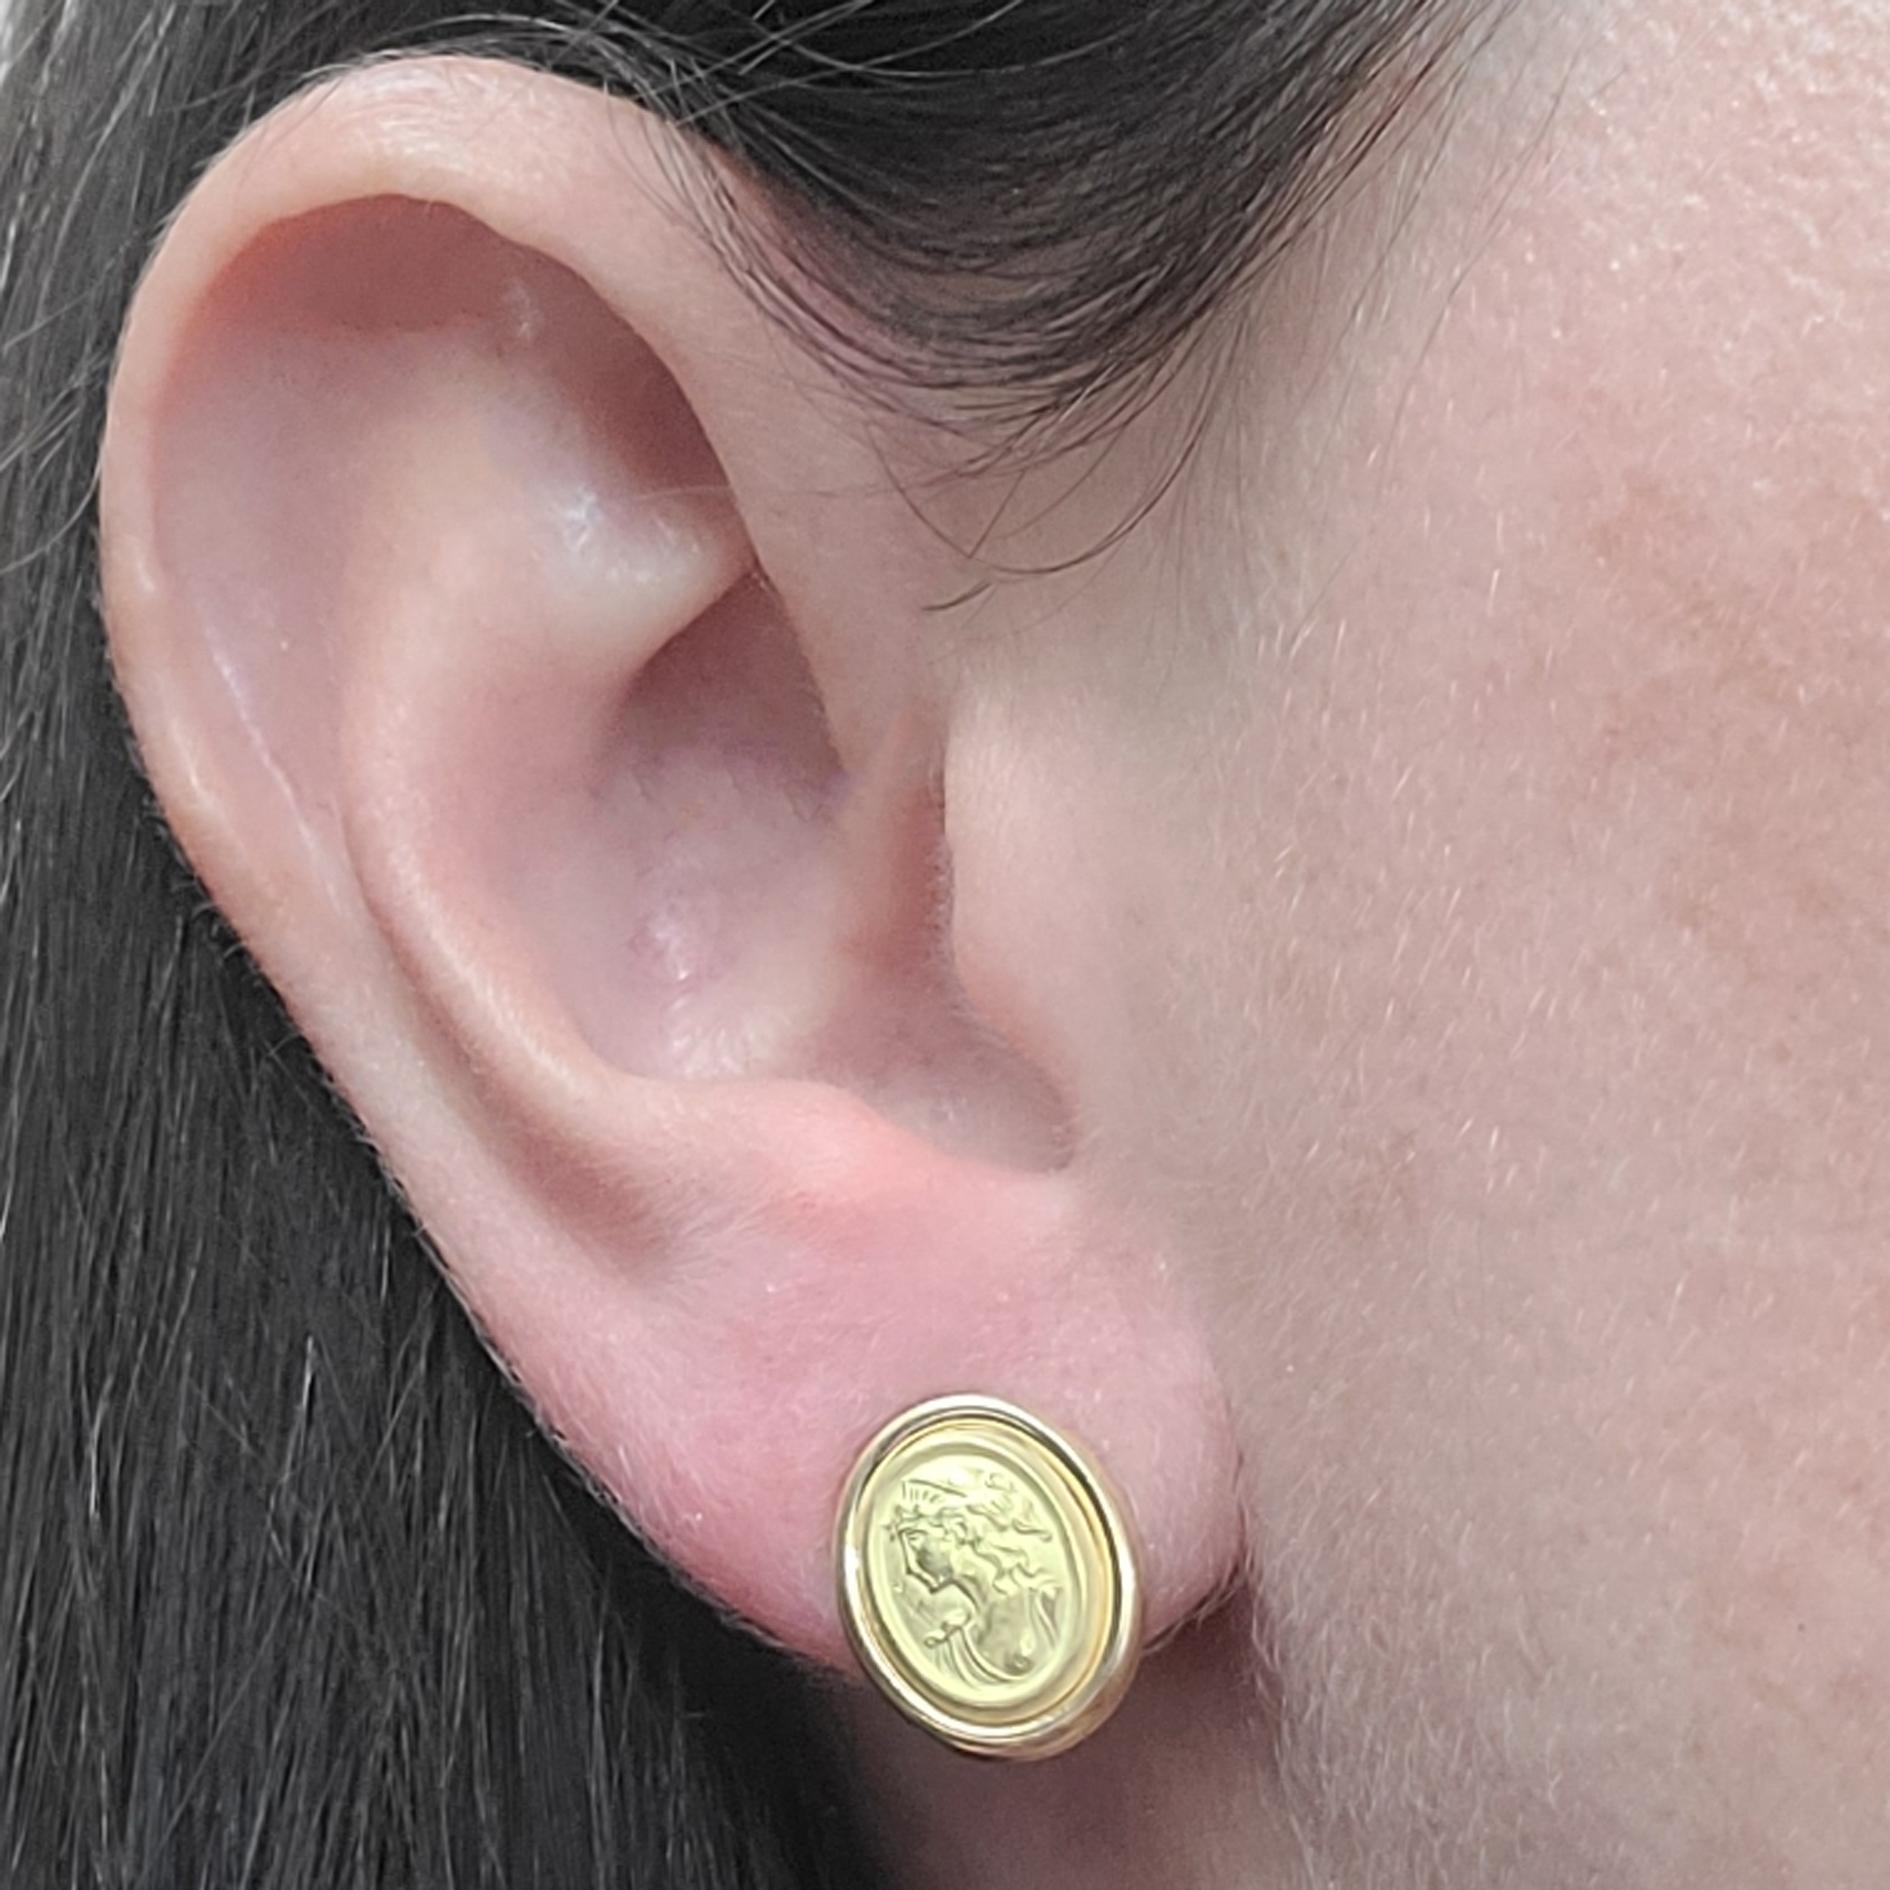 Picinotti 18 Karat Yellow Gold Oval Stud Earrings With Brushed Relief Of A Woman's Profile. Pierced Post With Friction Back. Finished Weight Is 2.2 Grams. Made in Italy.